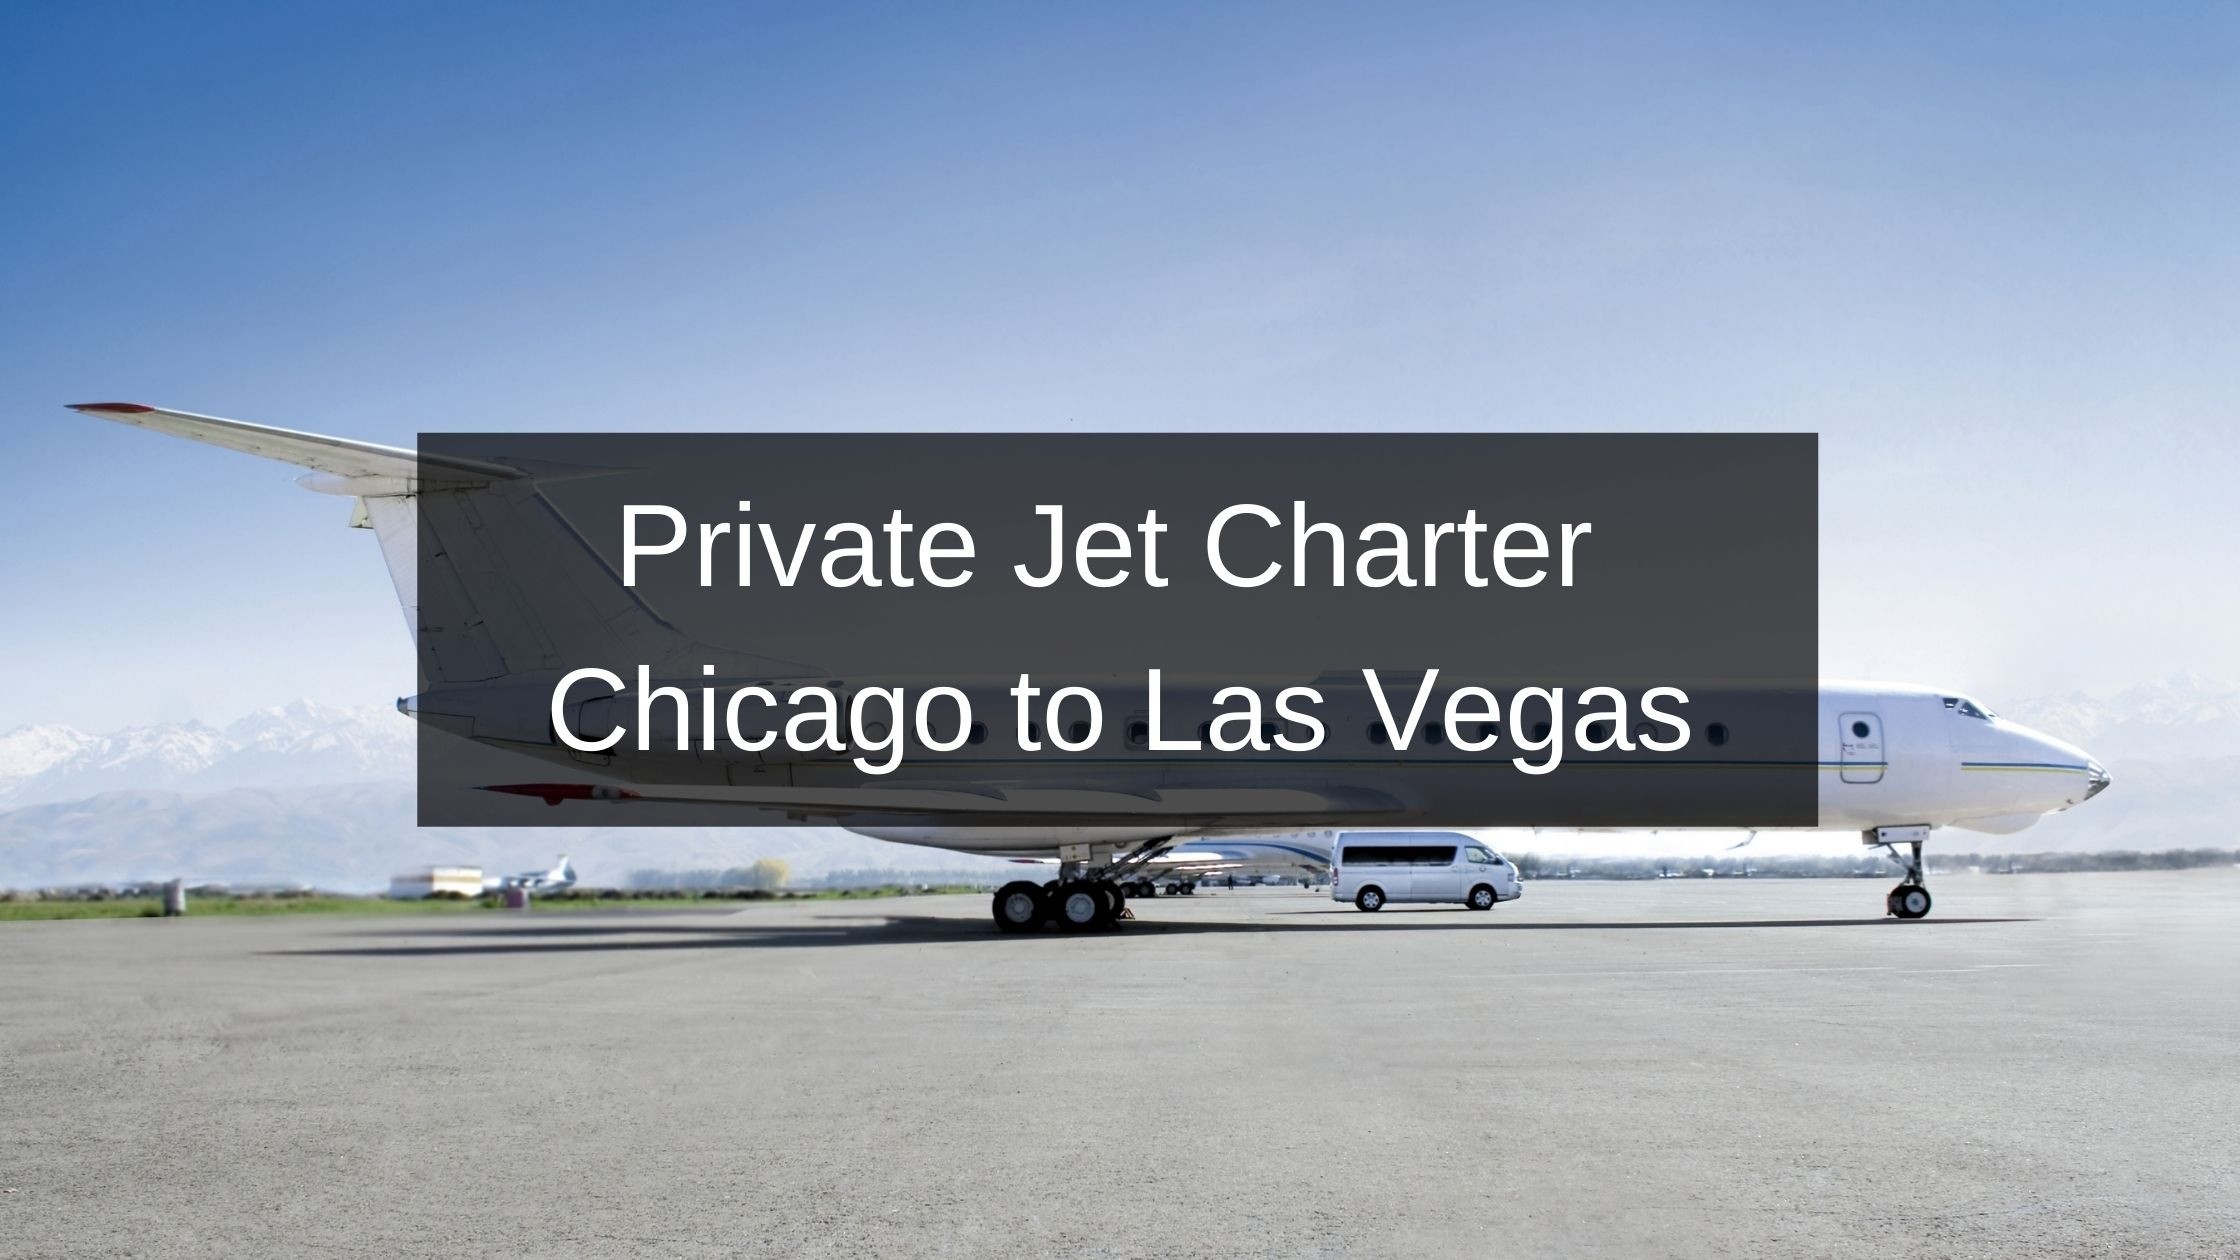 Private Jet Charter Chicago to Las Vegas